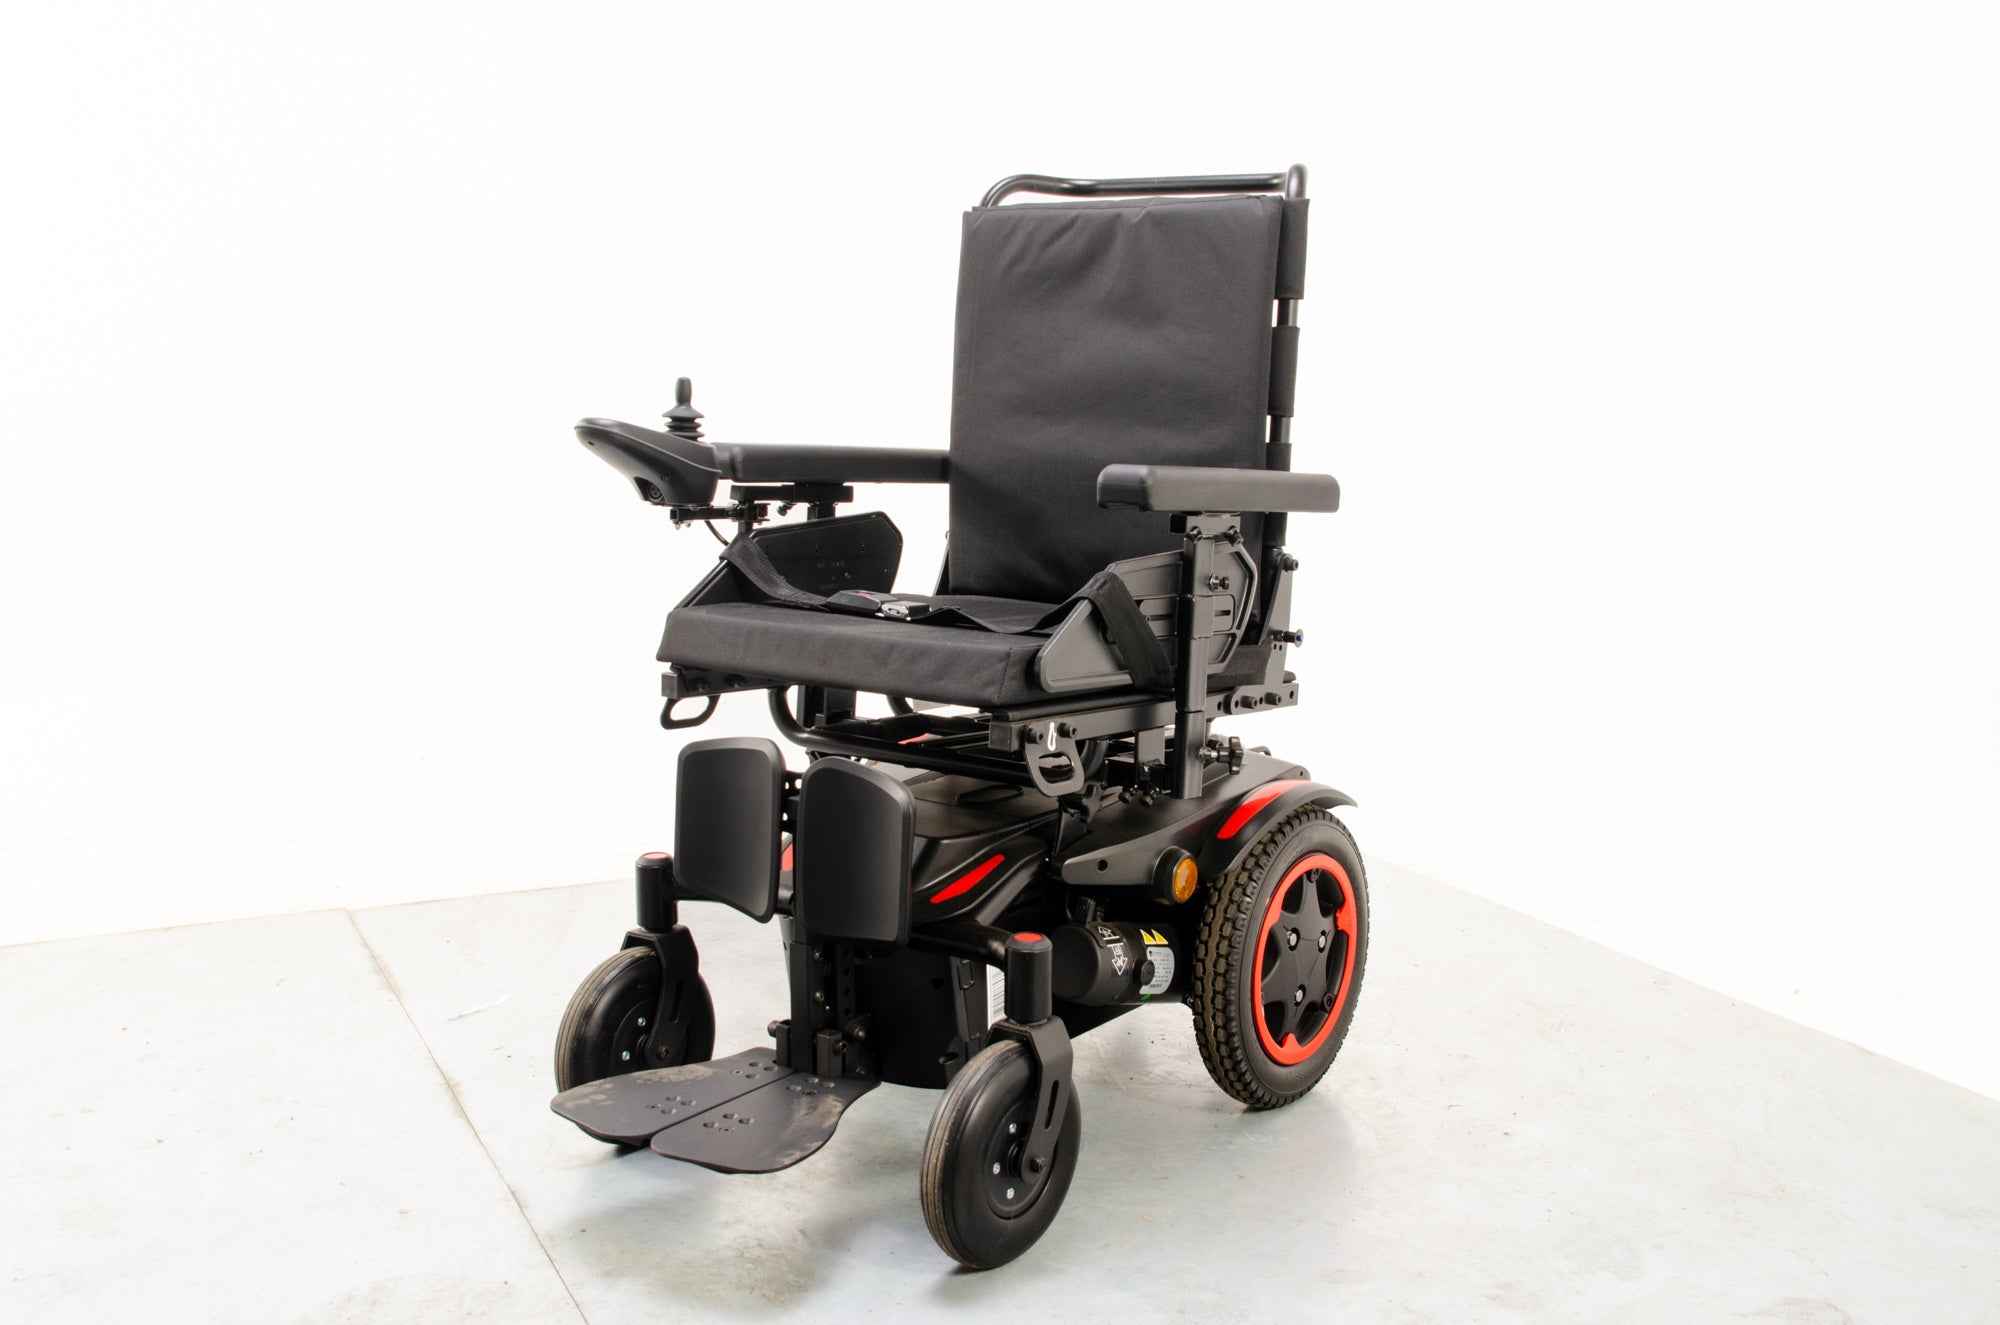 2022 Quickie Q100 R Compact Indoor Outdoor Powerchair Wheelchair Sunrise Medical